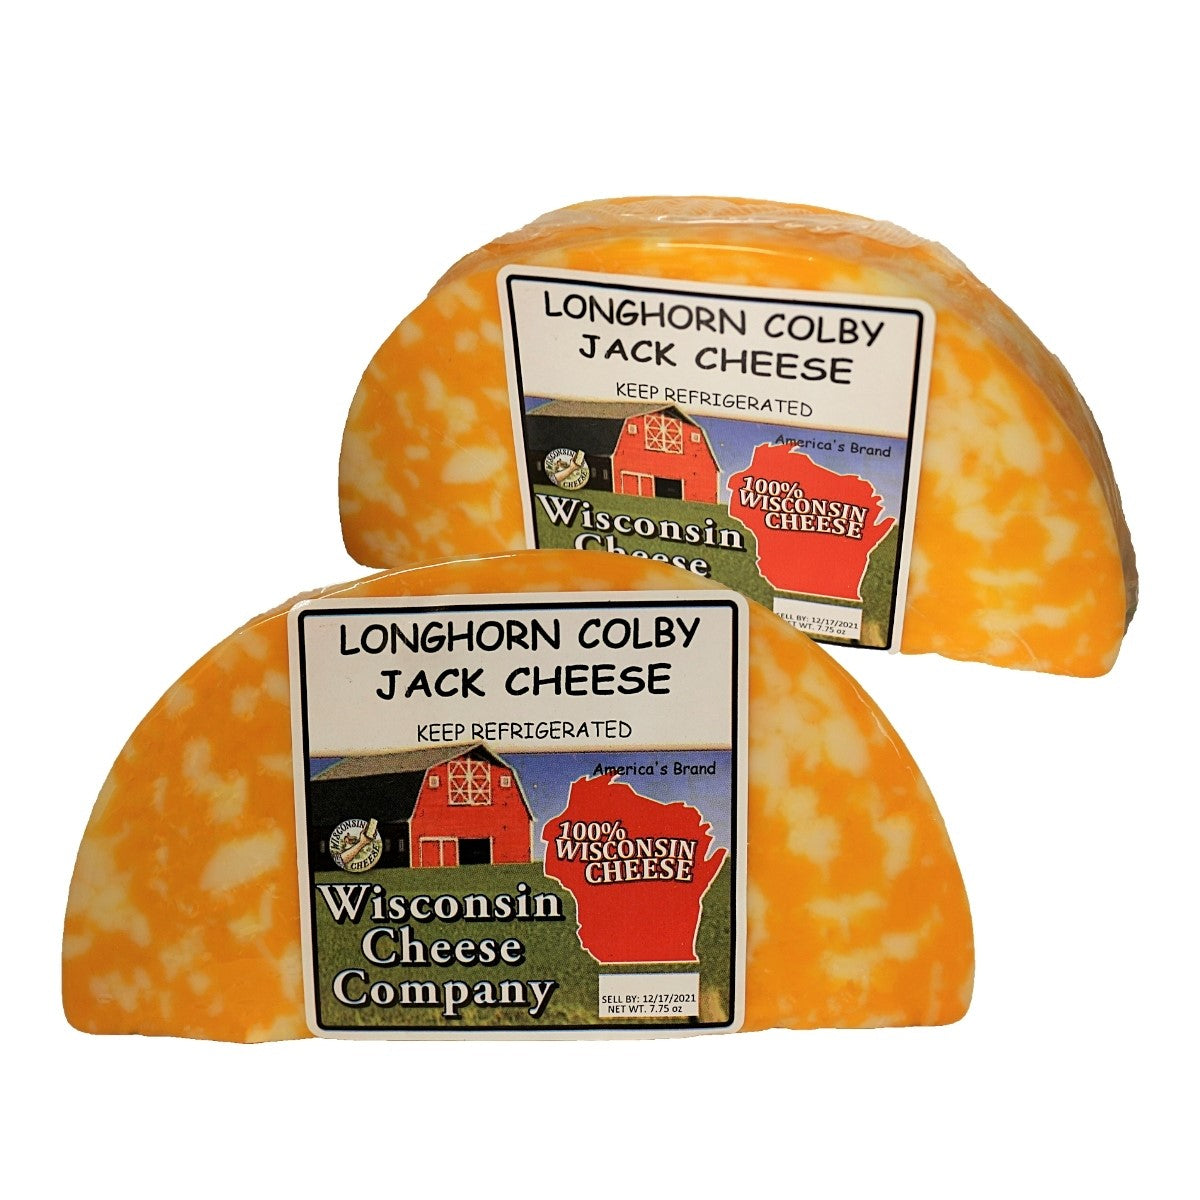 Longhorn Colby Jack Cheese